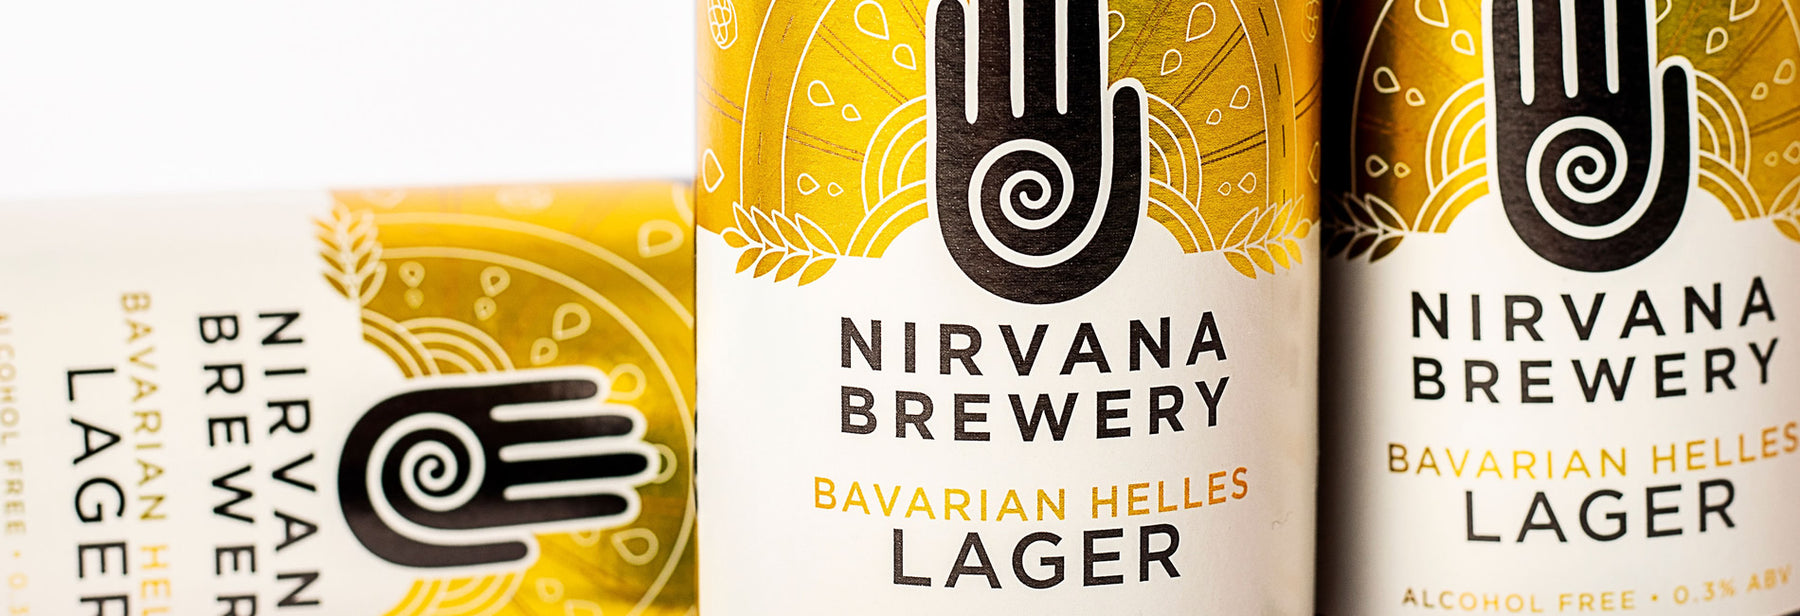 Nirvana Brewery Alcohol-Free Lager